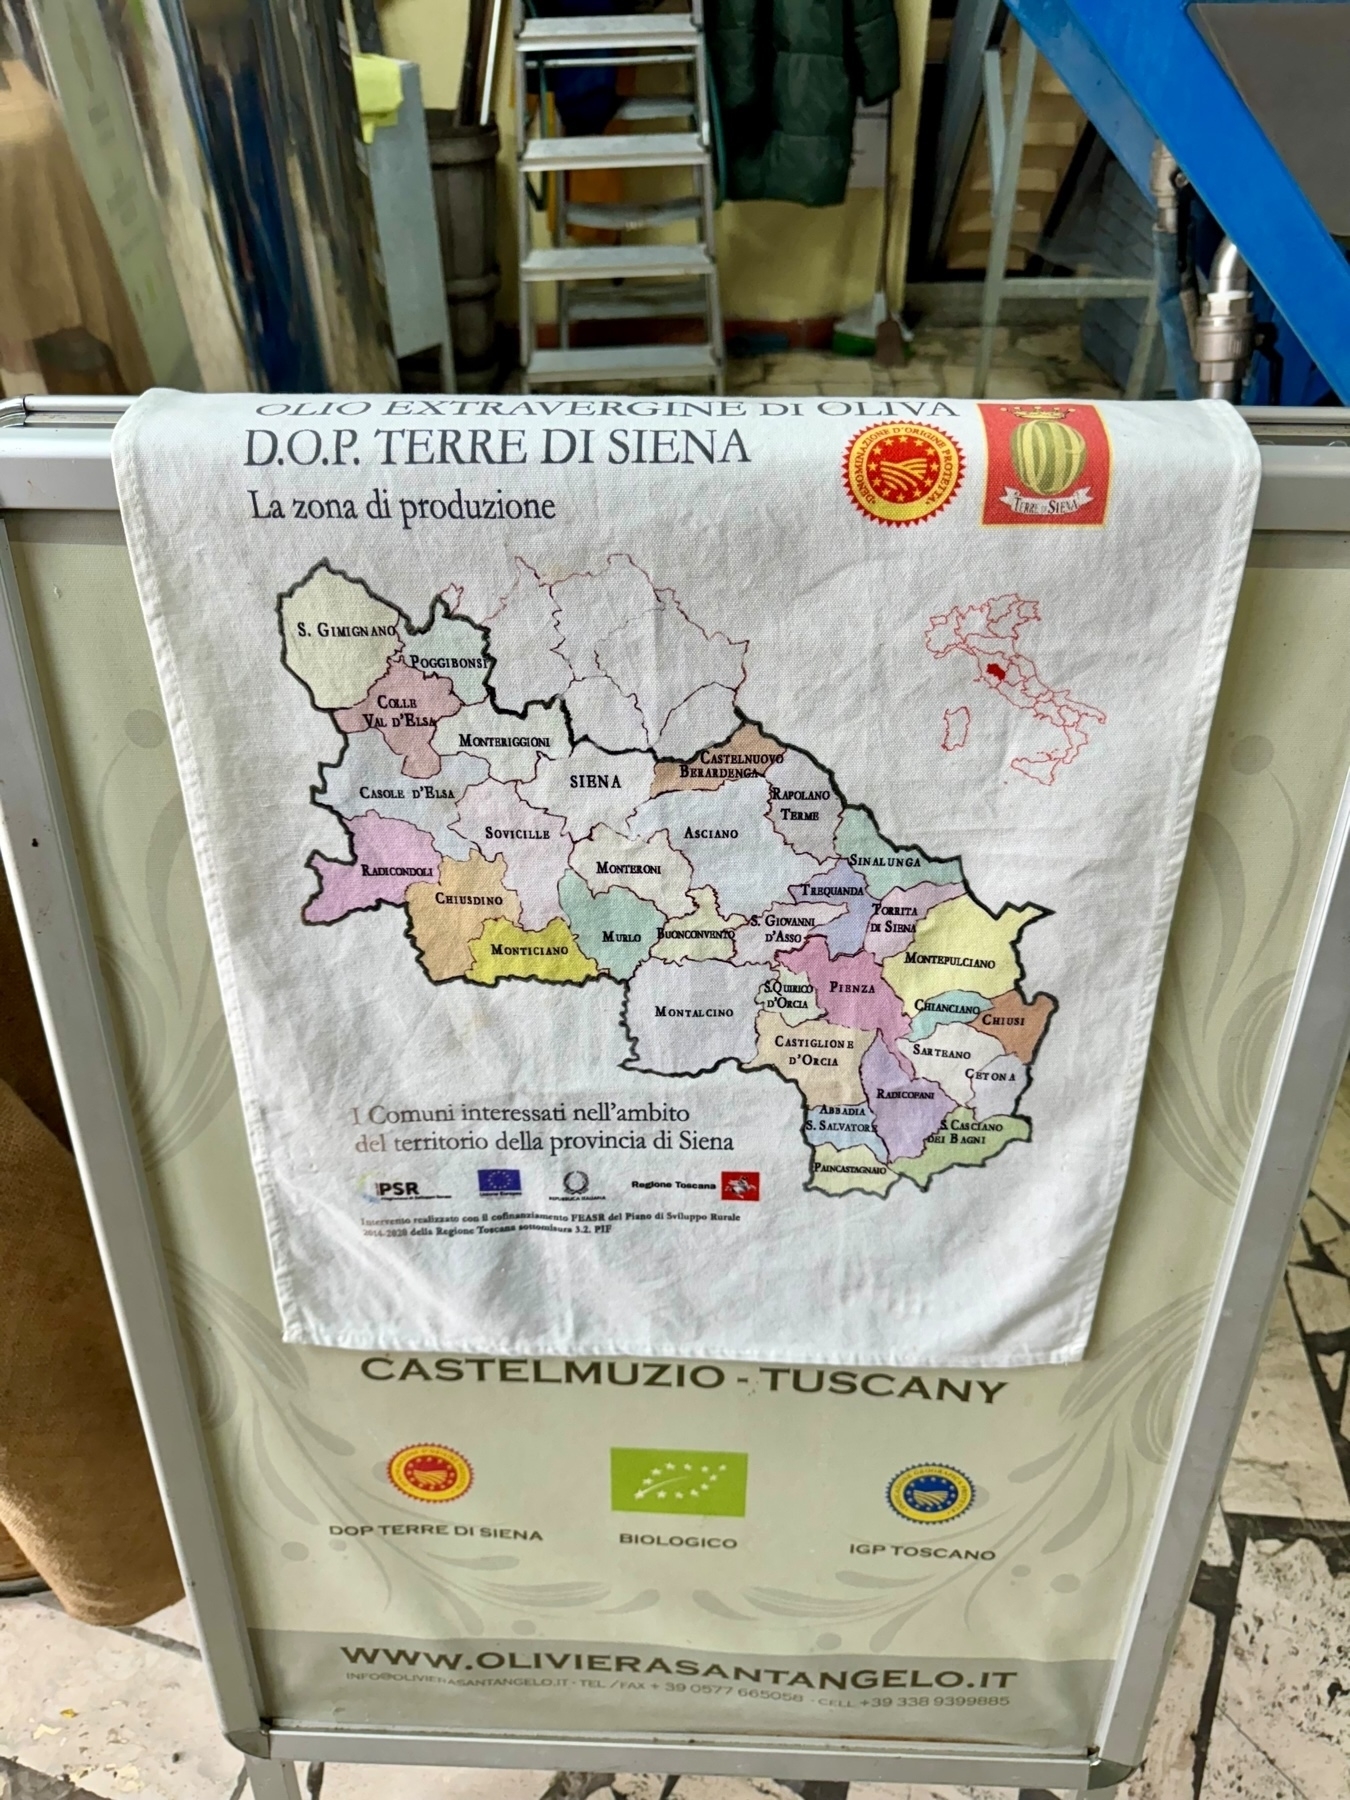 A detailed cloth map depicts the production area for D.O.P. Terre di Siena olive oil in the province of Siena, Tuscany. It highlights various localities involved in olive oil production. 